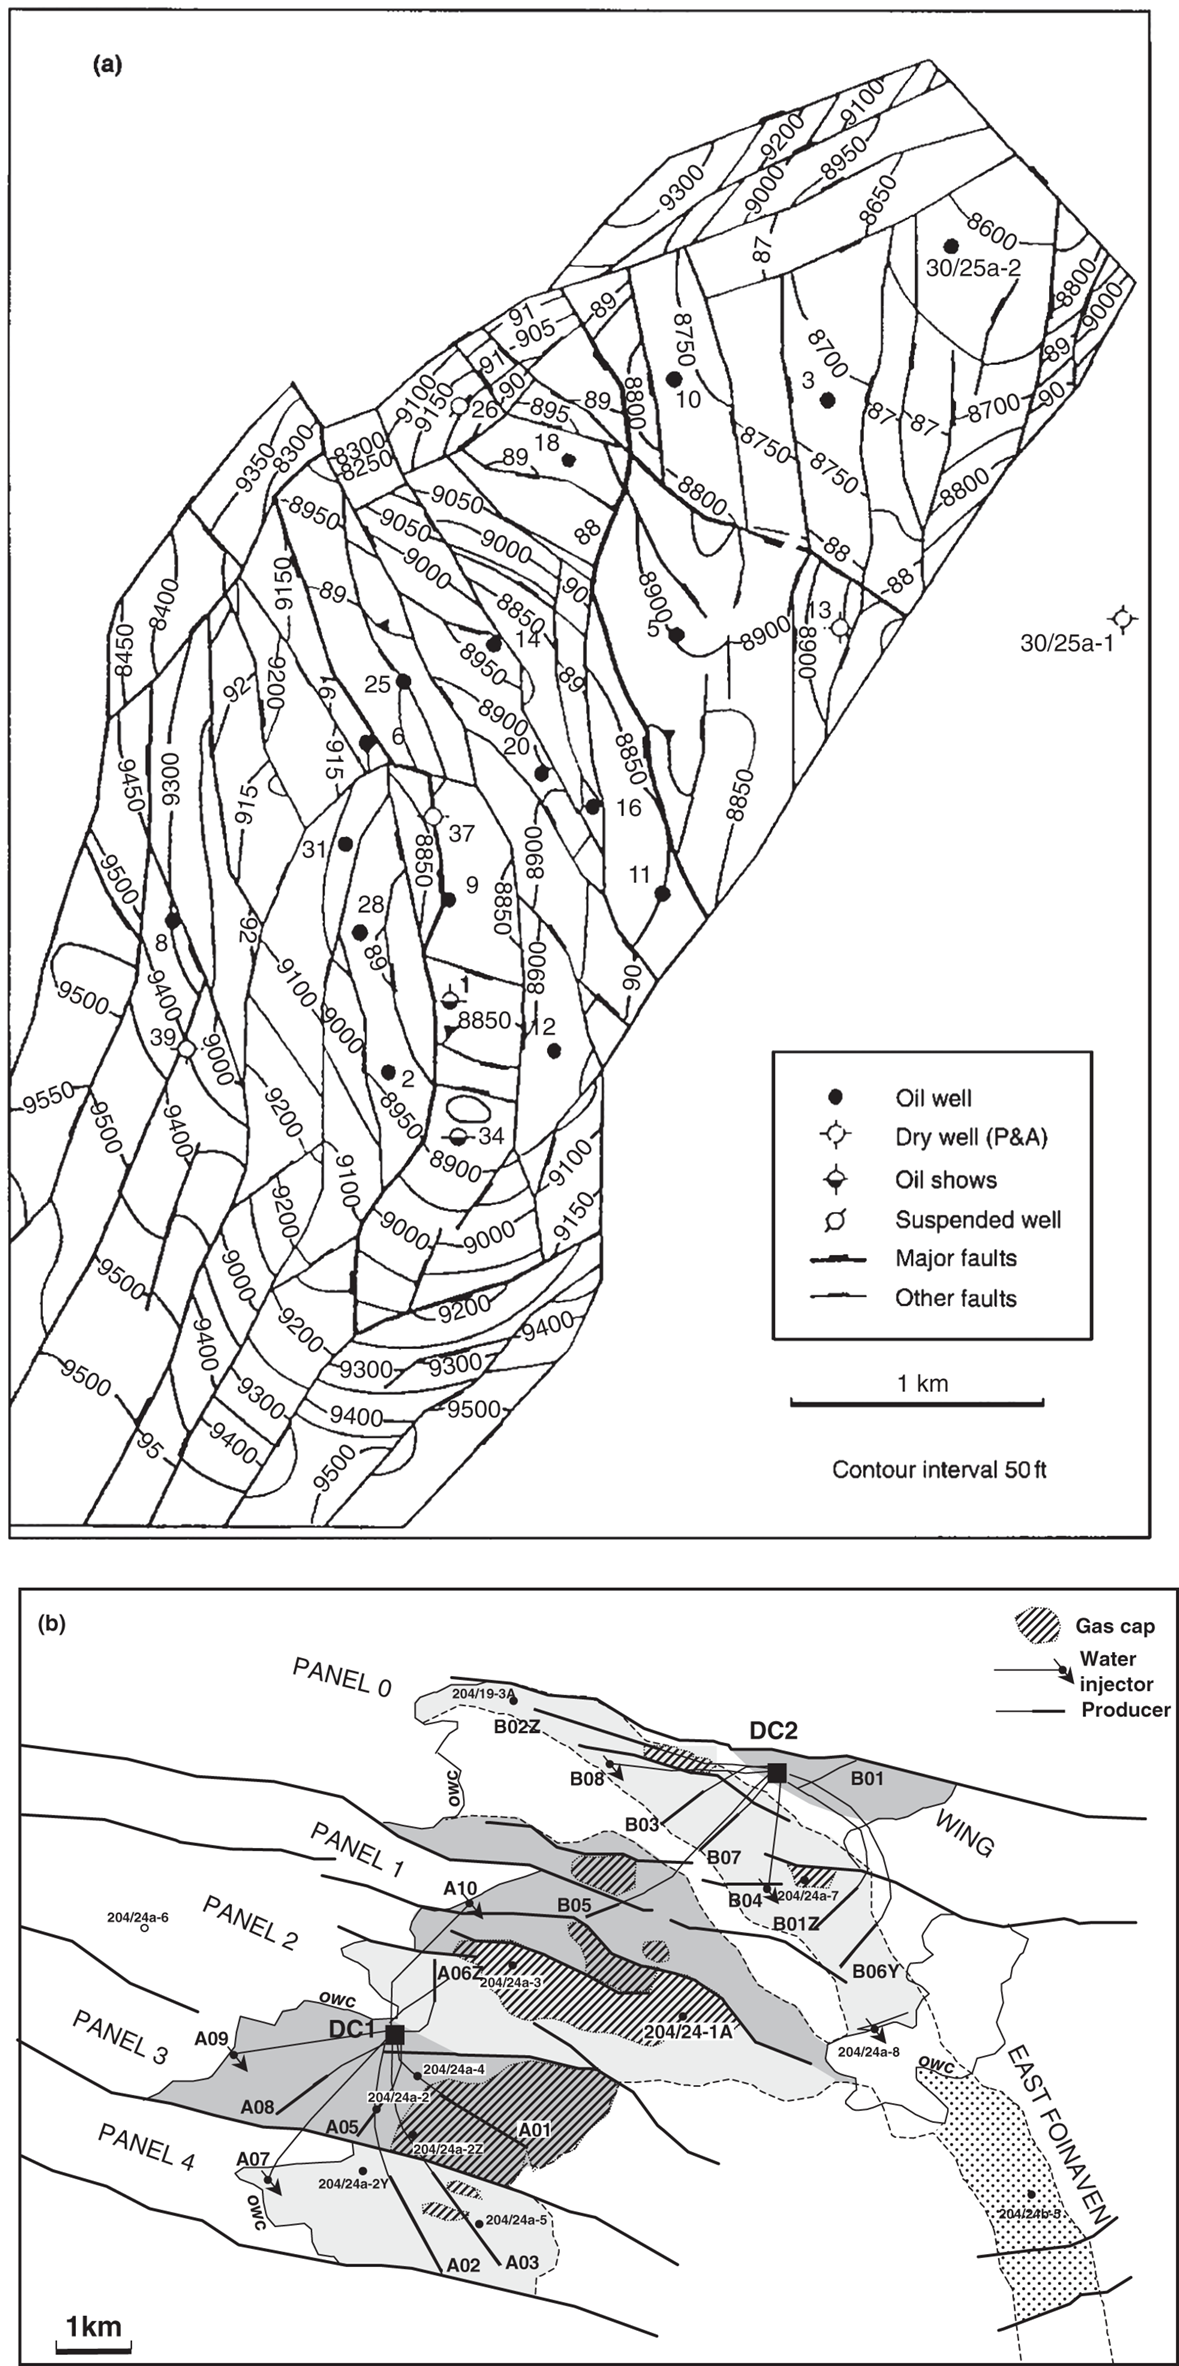 Vertical versus horizontal wells (contrasted development methods for the Argyll and Foinaven fields, UK continental shelf. (a) The Argyll Field was developed with vertical and near-vertical wells from a floating facility during the 1970s and 1980s. (b) The panel map and development well locations for the Foinaven Field, UK continental shelf. The wells are drilled from two centers (DC1 and DC2), individual, high-angle wells targeting specific reservoir, sandstone lobes.